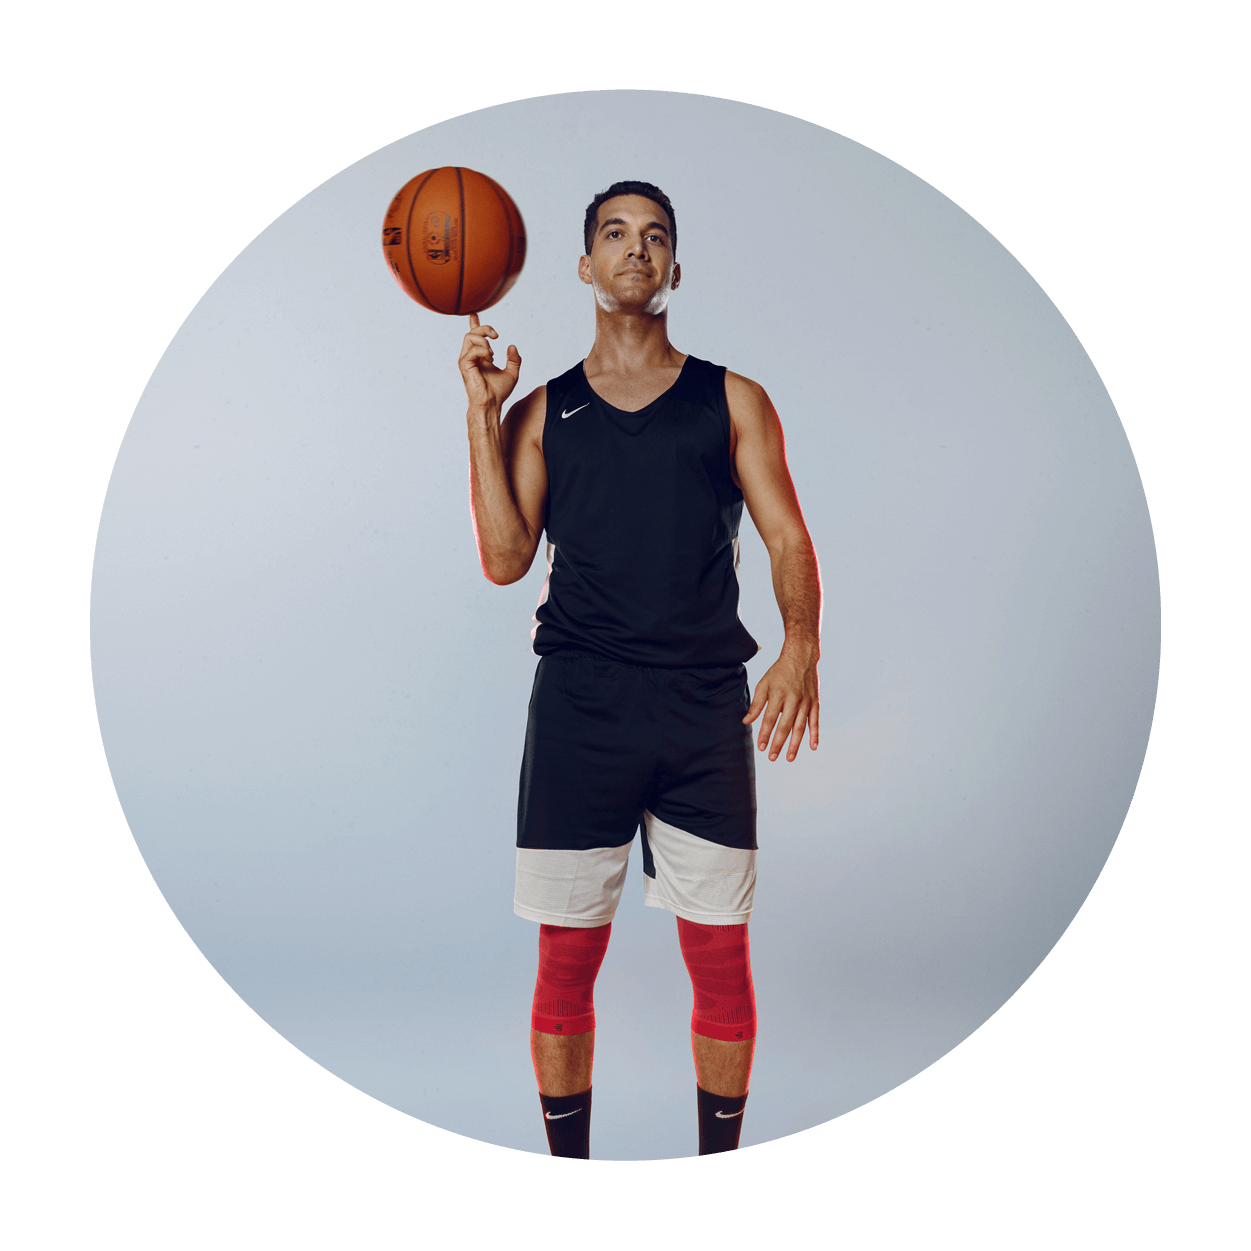 Sports Compression Knee Support NBA with Team Editions, Basketball, Activity